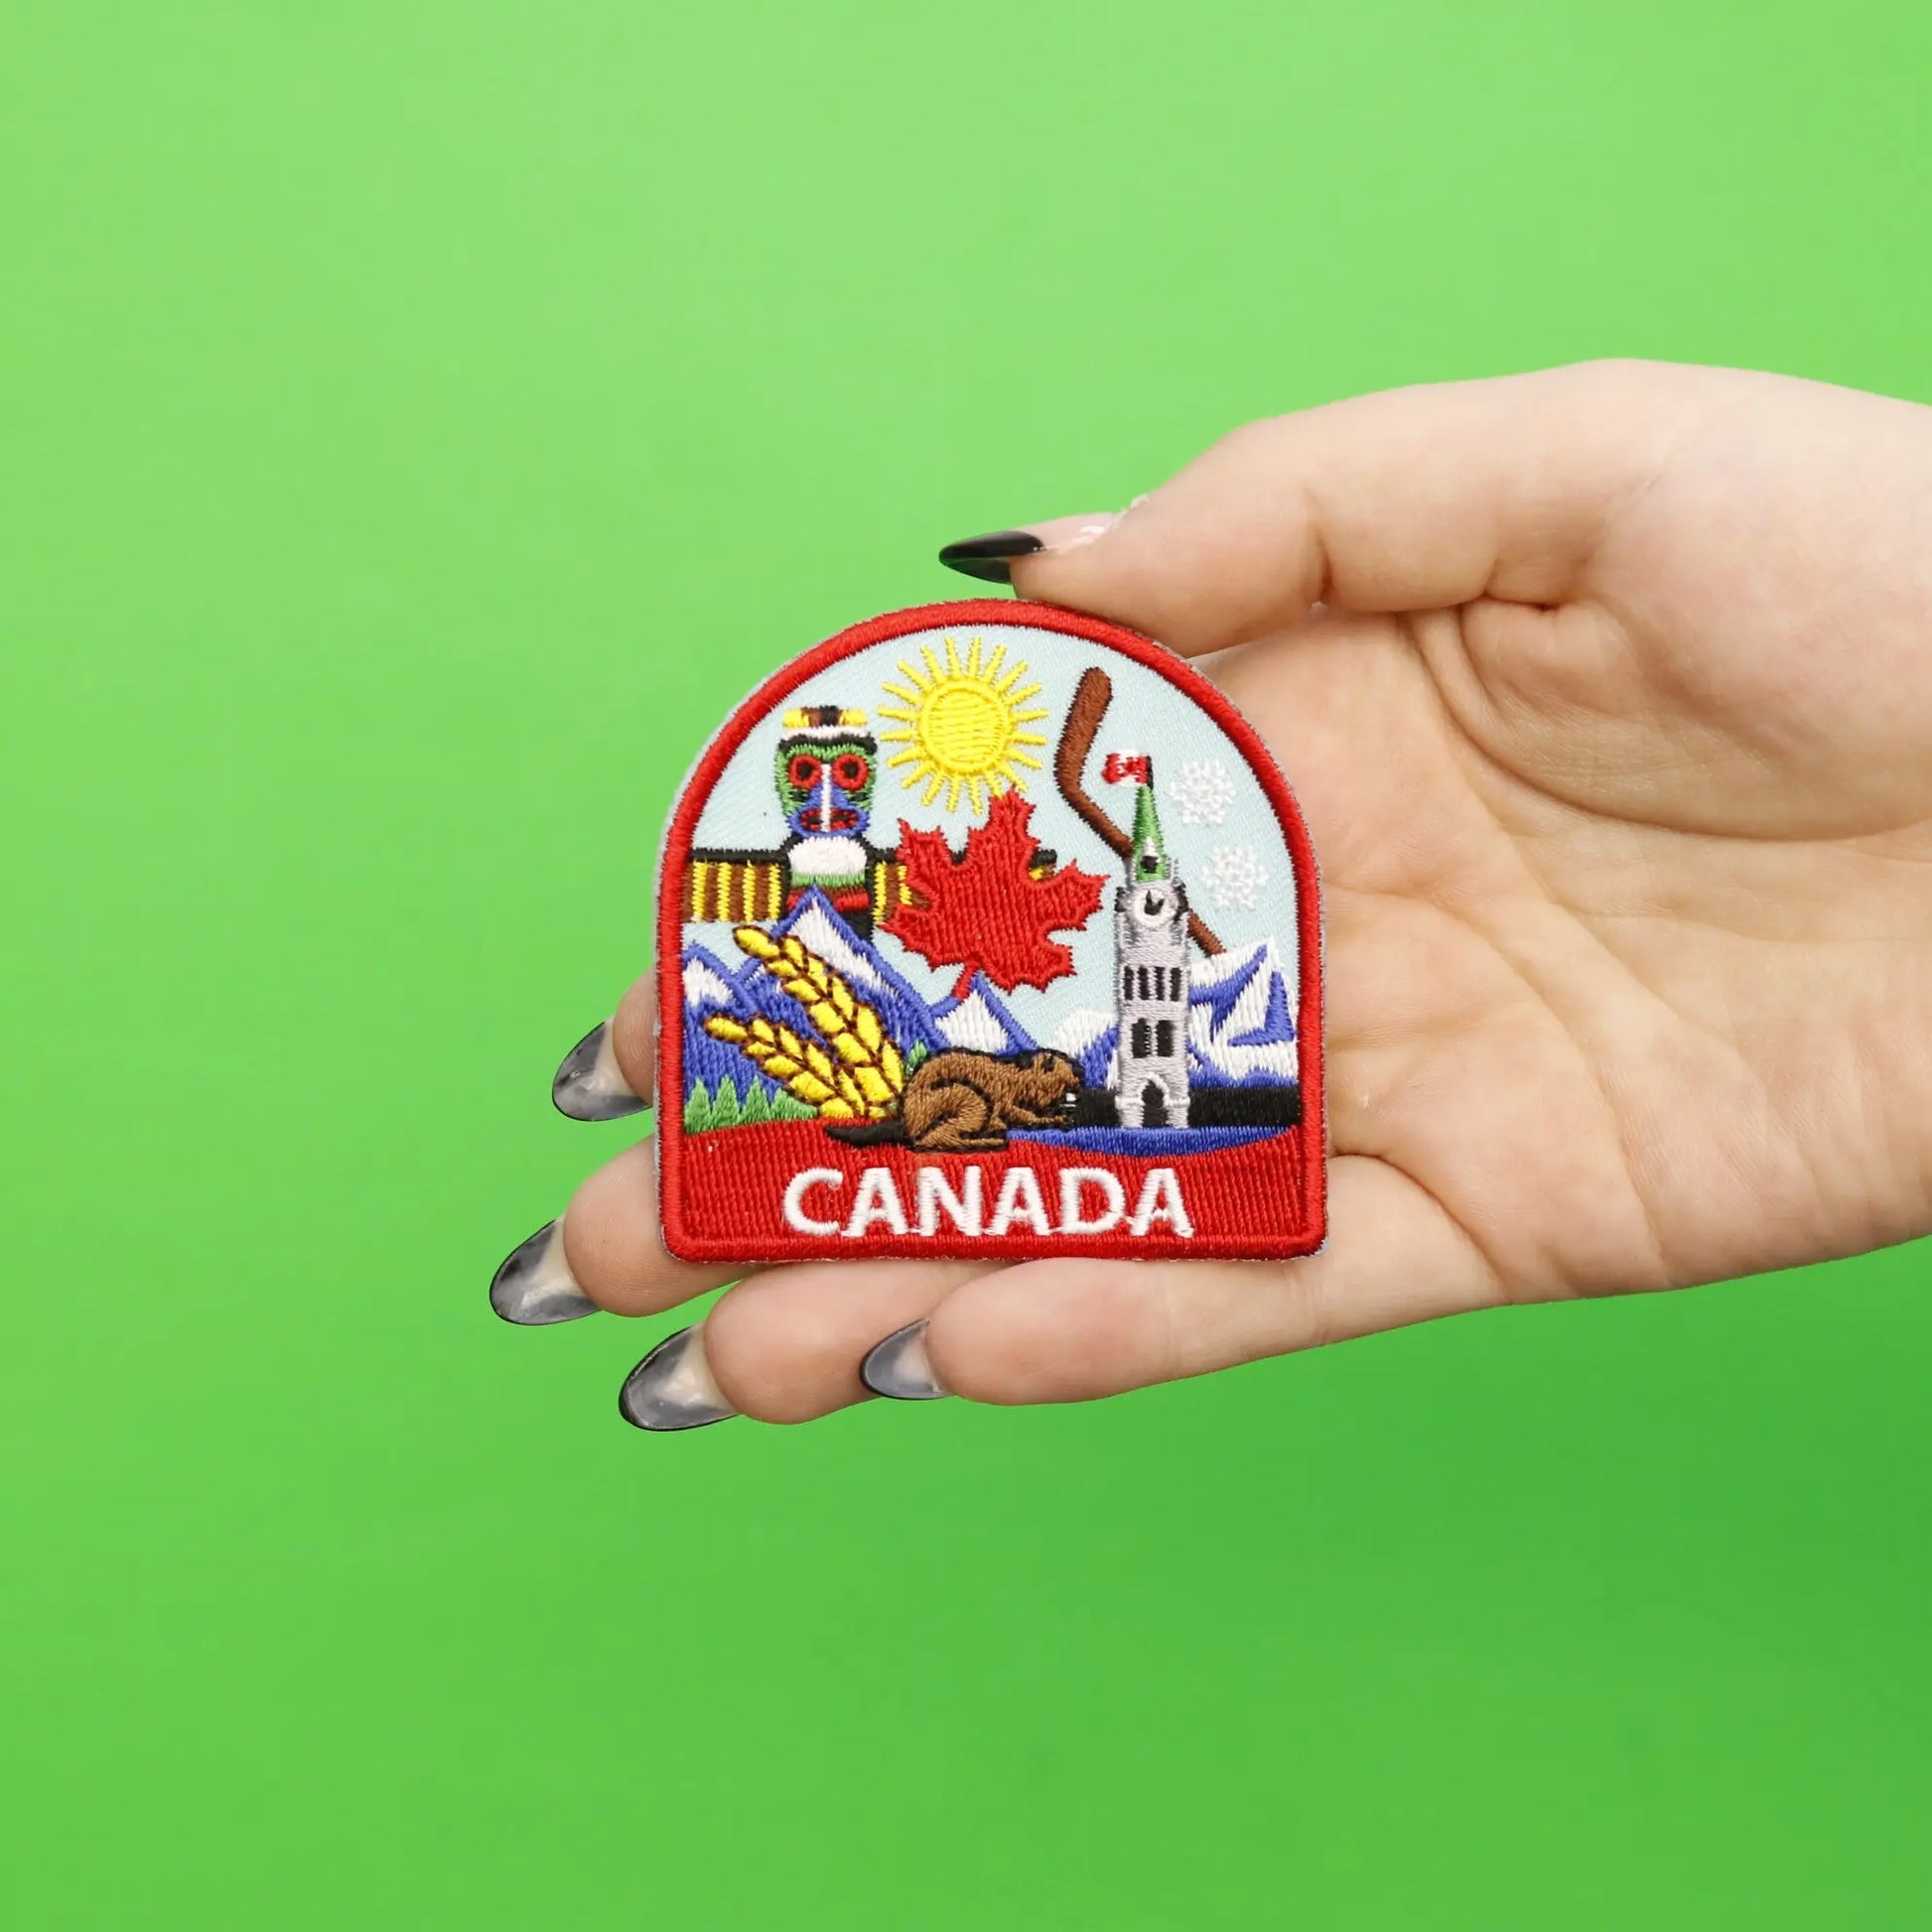 Canada Travel Embroidered Iron On Patch 